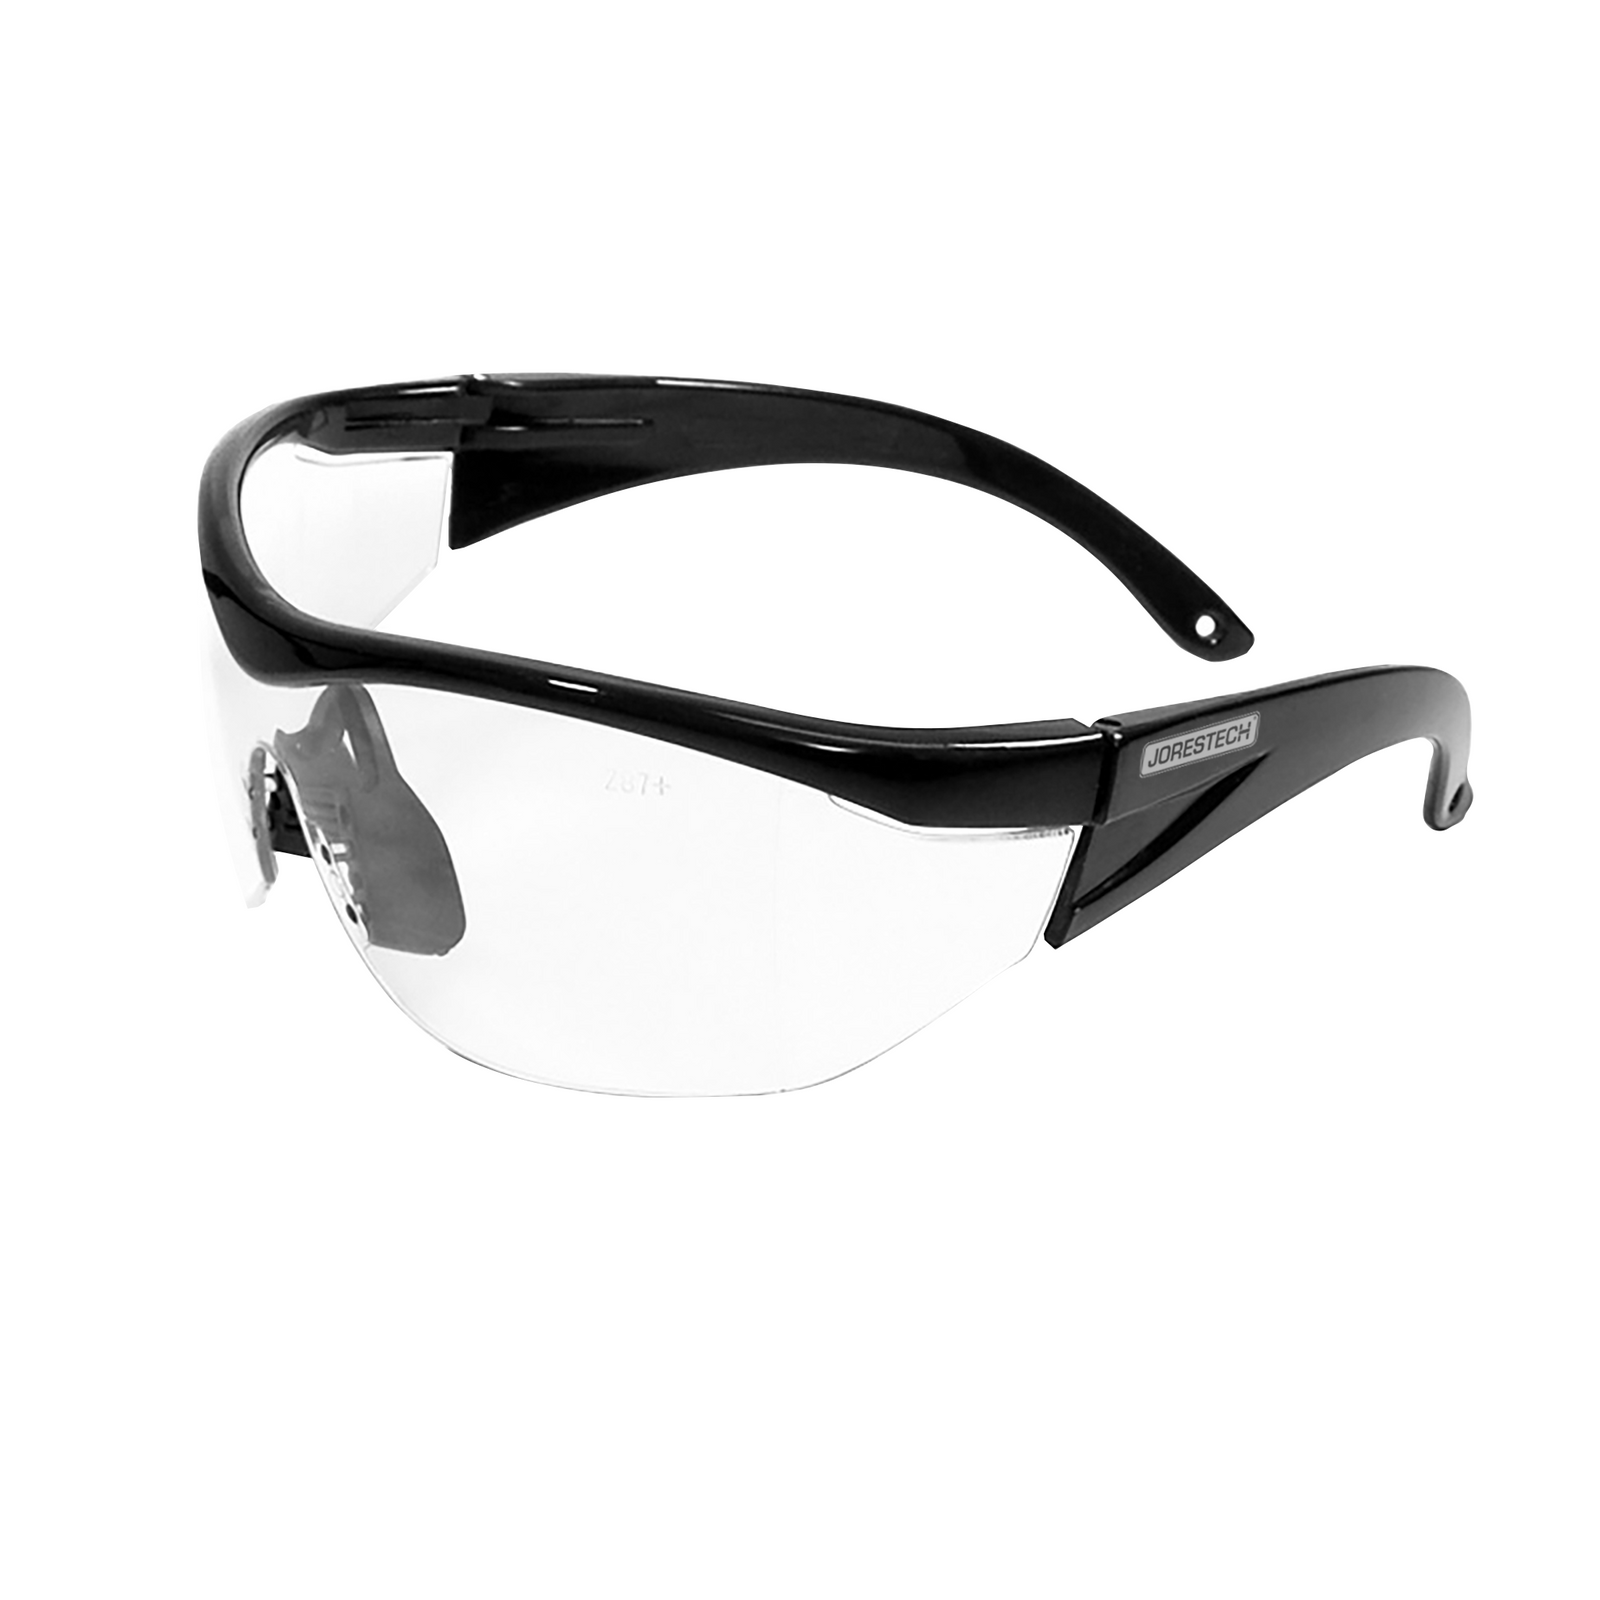 Diagonal view of a modern design framed JORESTECH safety clear glasses with side shields for high impact protection. There is a embedder mark of the polycarbonate glass that reads Z87+ which is the ANSI standard